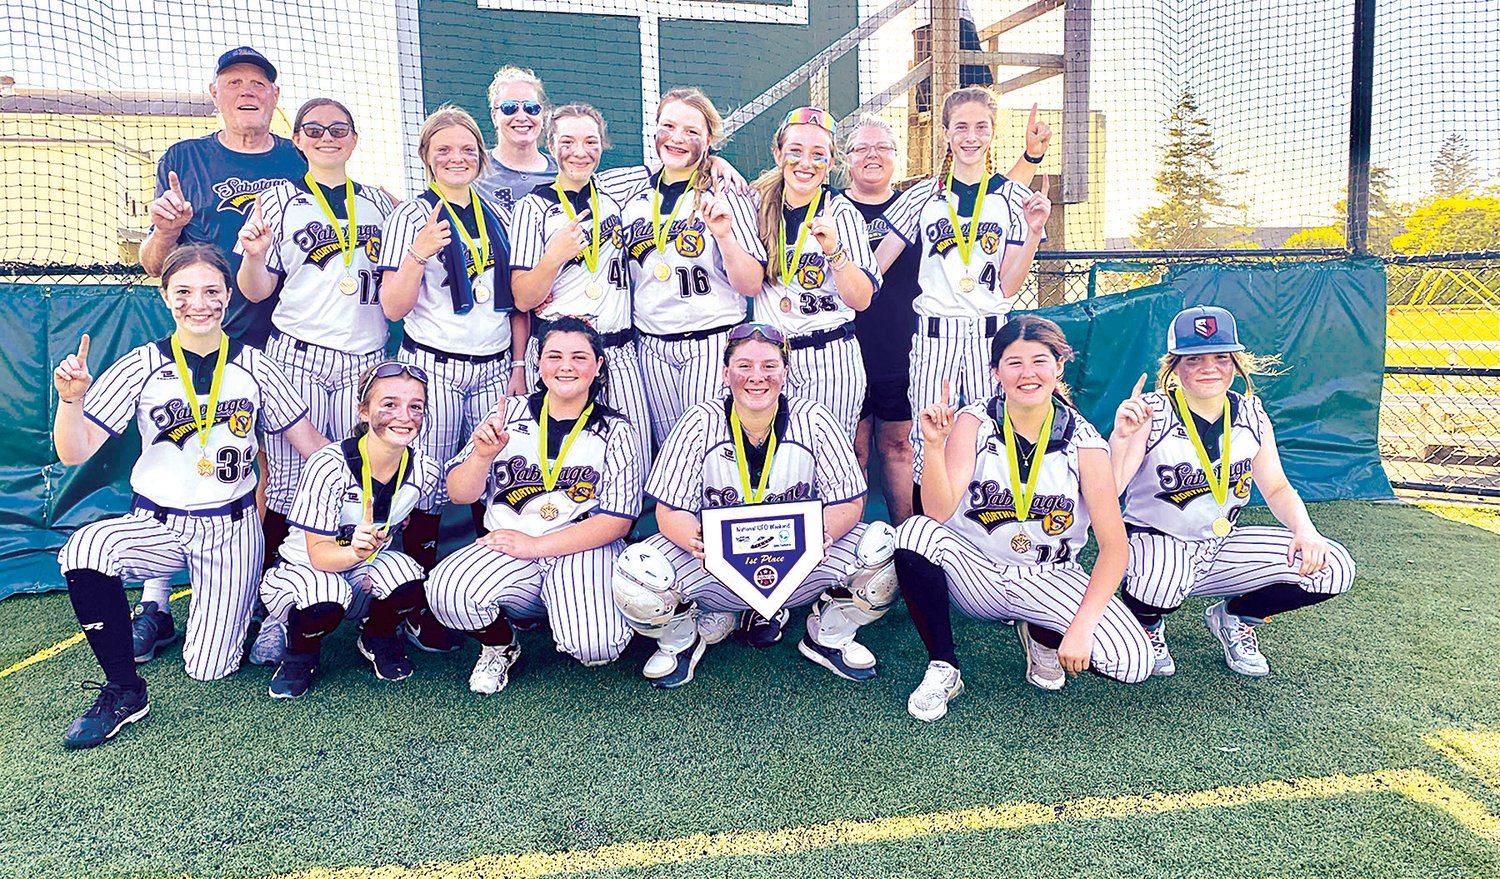 The Sabotage 14U fastpitch team won its tournament last weekend in Seaside, finishing first in a field of eight teams. It was Sabotage’s second time winning the tournament and second tournament championship in the month of June. Players pictured in the back row, from left: Coach Ken Sack, McKenna Smith, Brooklyn Sprague, Coach Kendra Wakefield, Hollynn Wakefield, Payton Baumel, Makenzie Erickson, Coach Shannon Baumel and Grace Pancake. In the front row, from left: Lyla Kirkpatrick, Lindsey Pinion, Jordyn Preston, Sopia Milanowski, Jordan Billie, and Olivia Friedley.